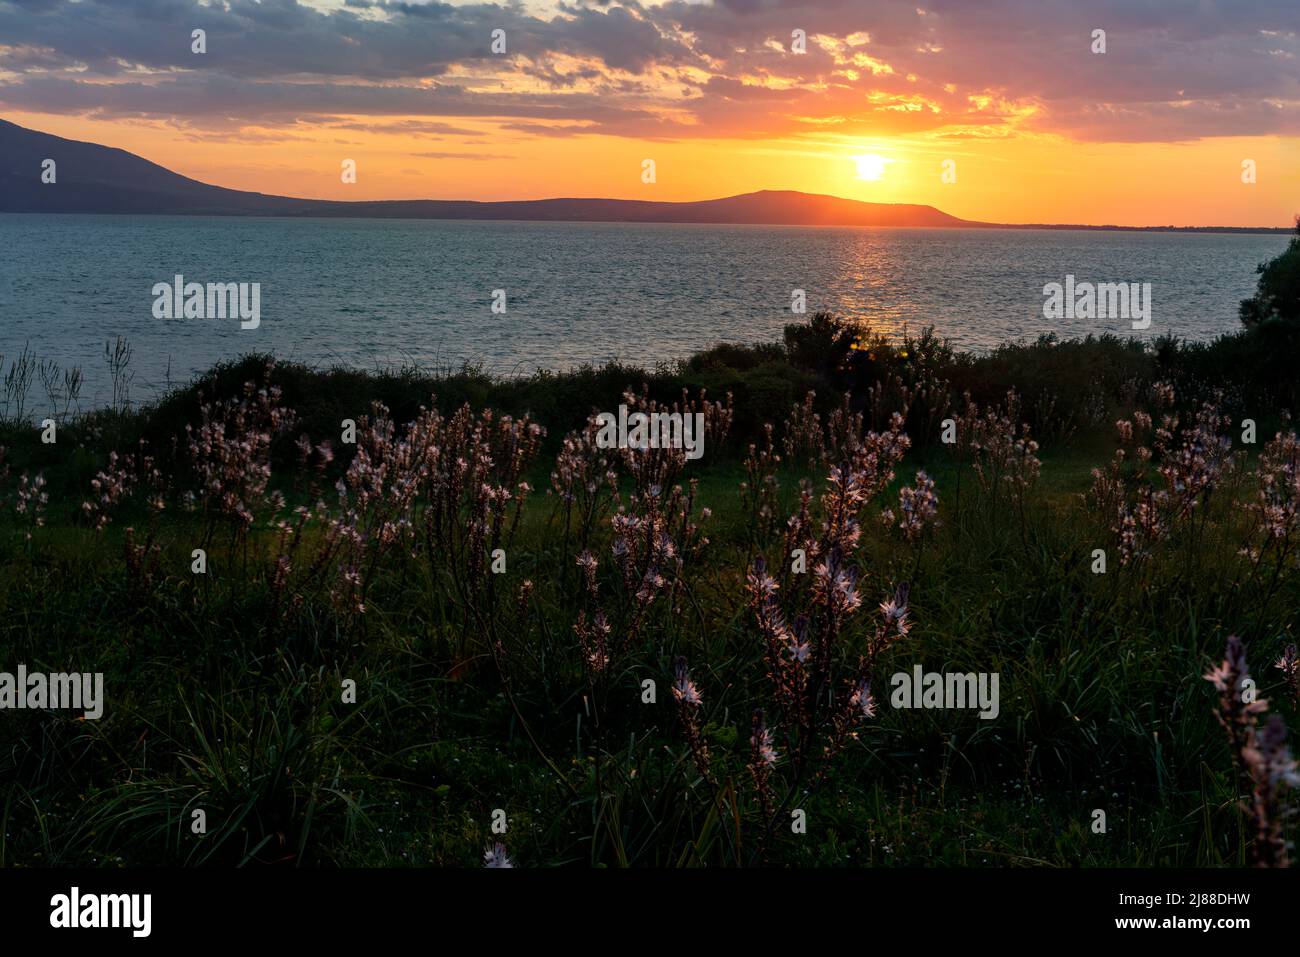 Red sunset on the Varano lake, in the foreground the flowering of white flowers. Ischitella, Foggia province, Puglia, Italy, Europe Stock Photo